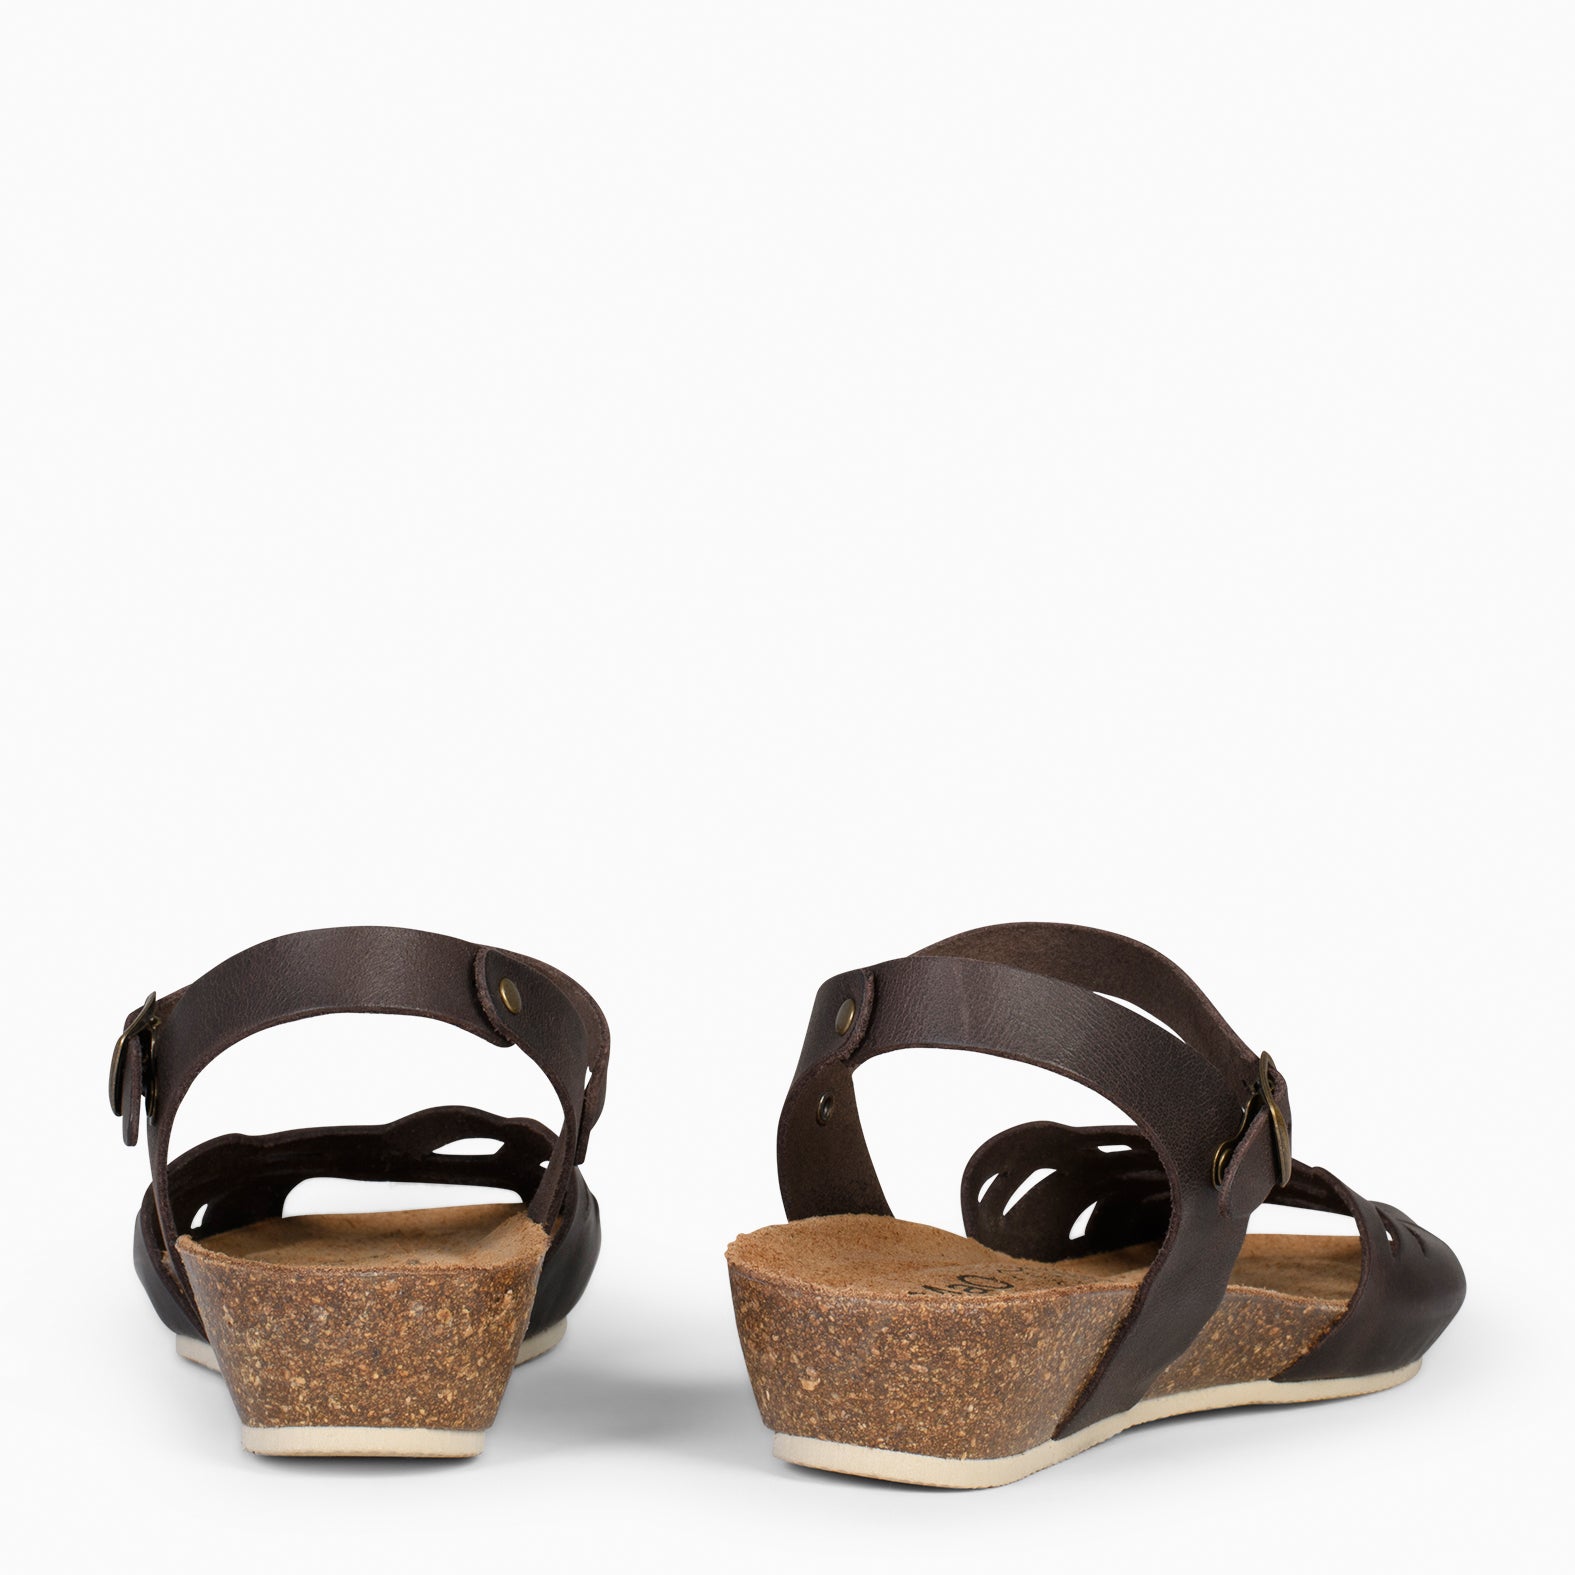 ALOE – BROWN BIO sandals with wedge